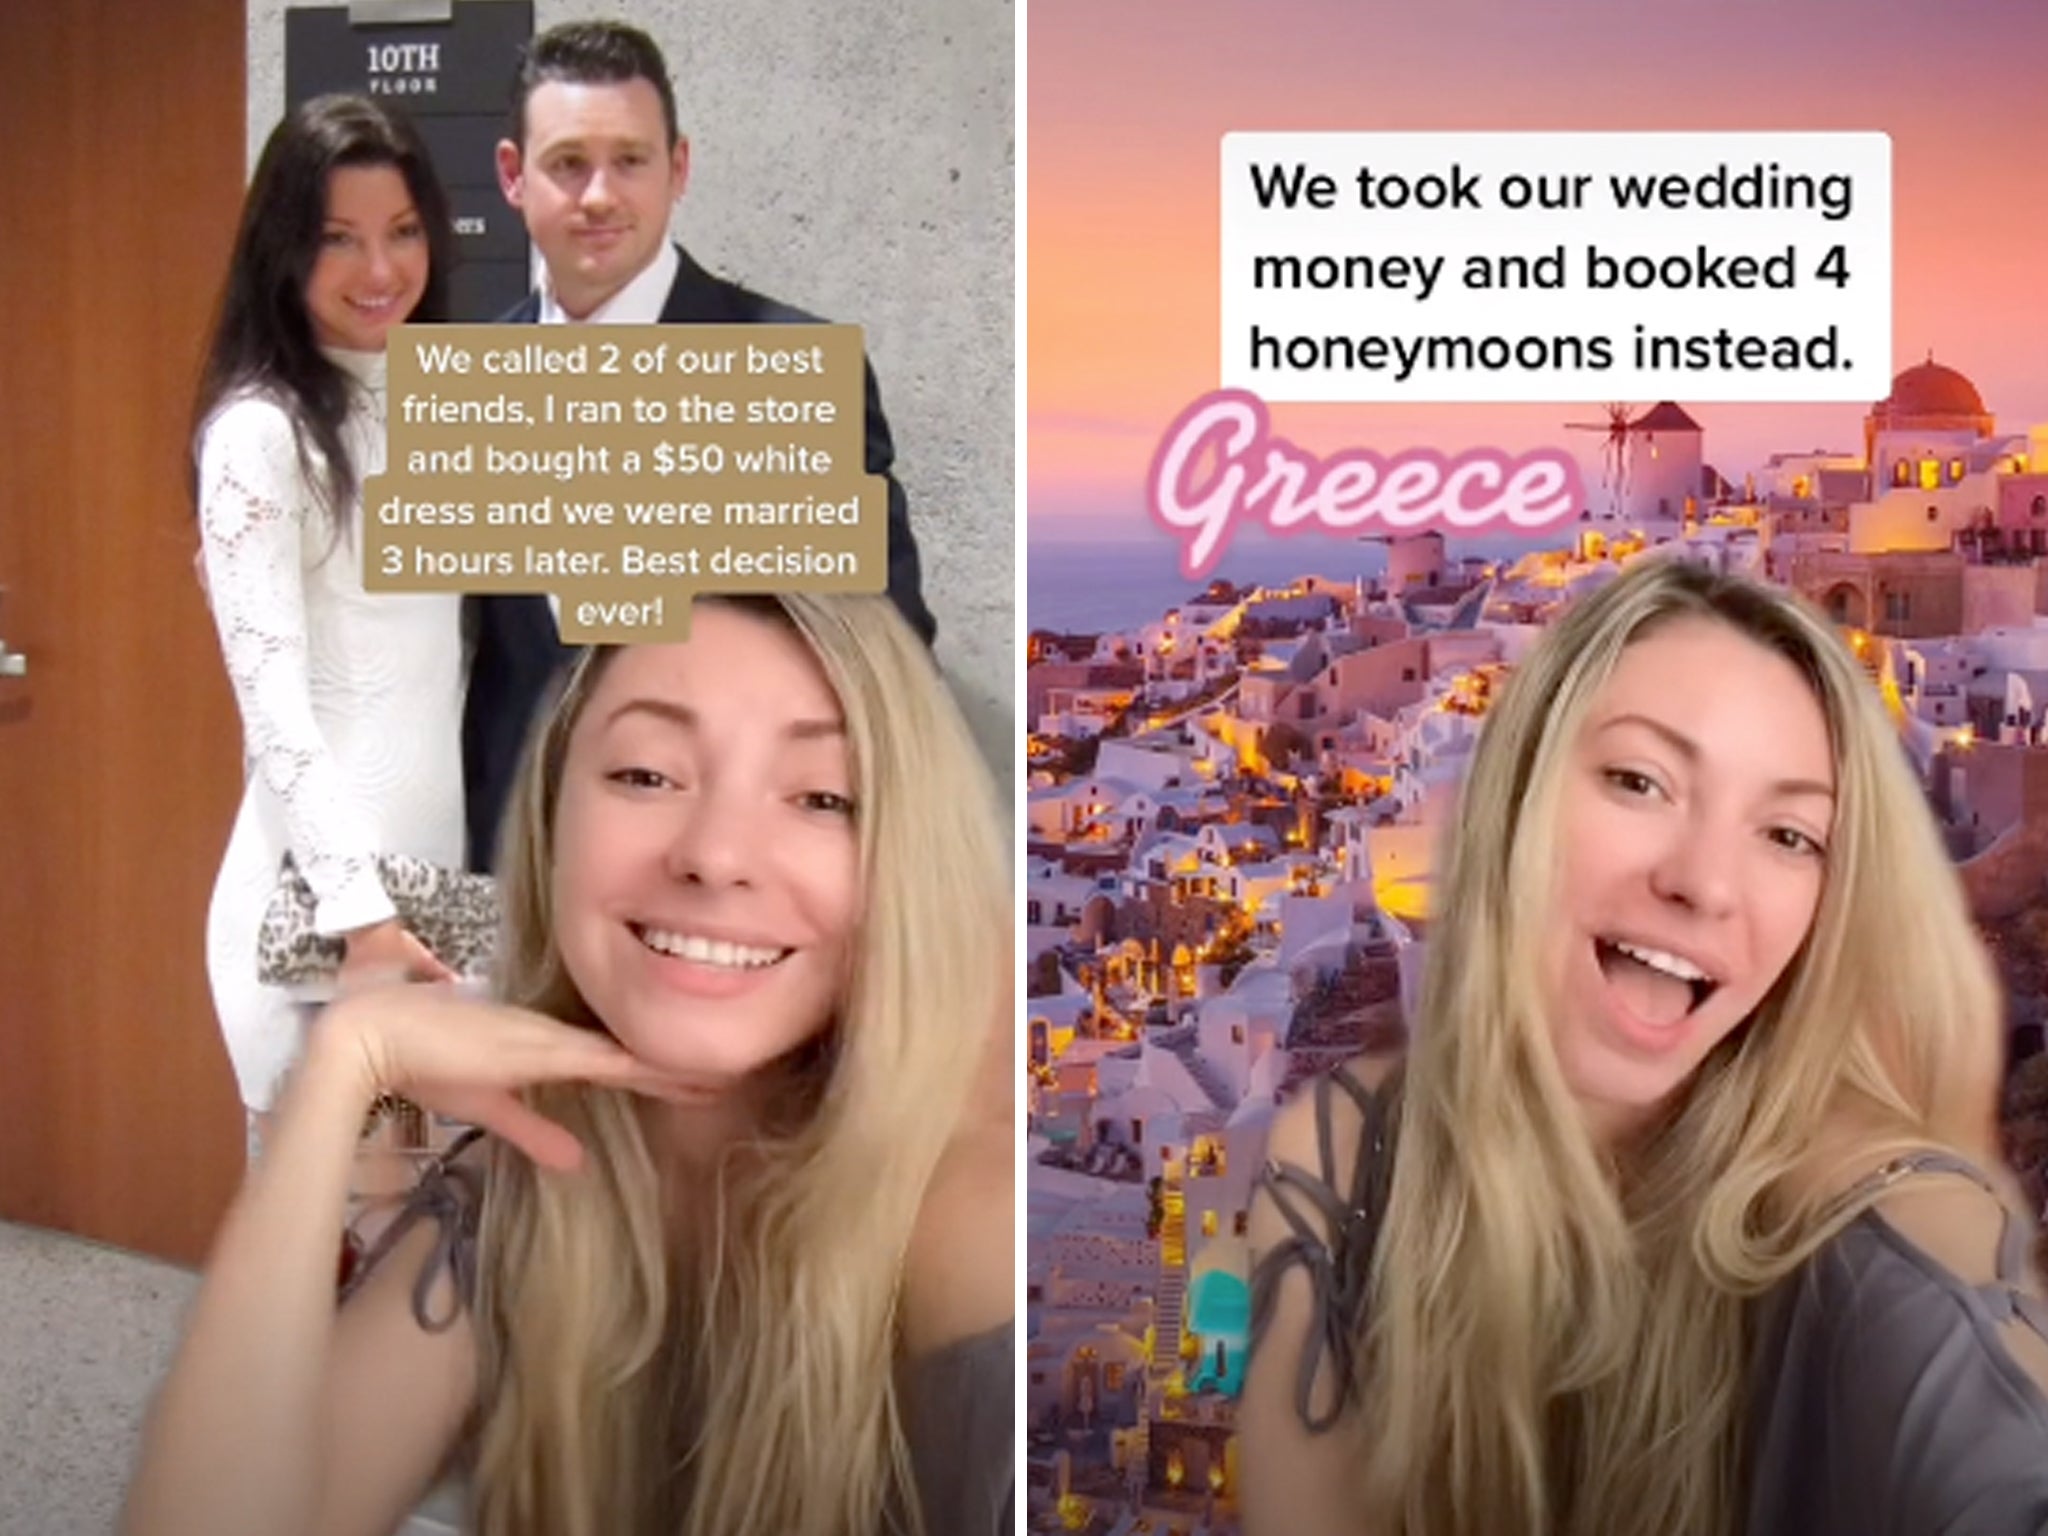 New York couple discarded plans for expensive wedding and spent the money on four honeymoons instead